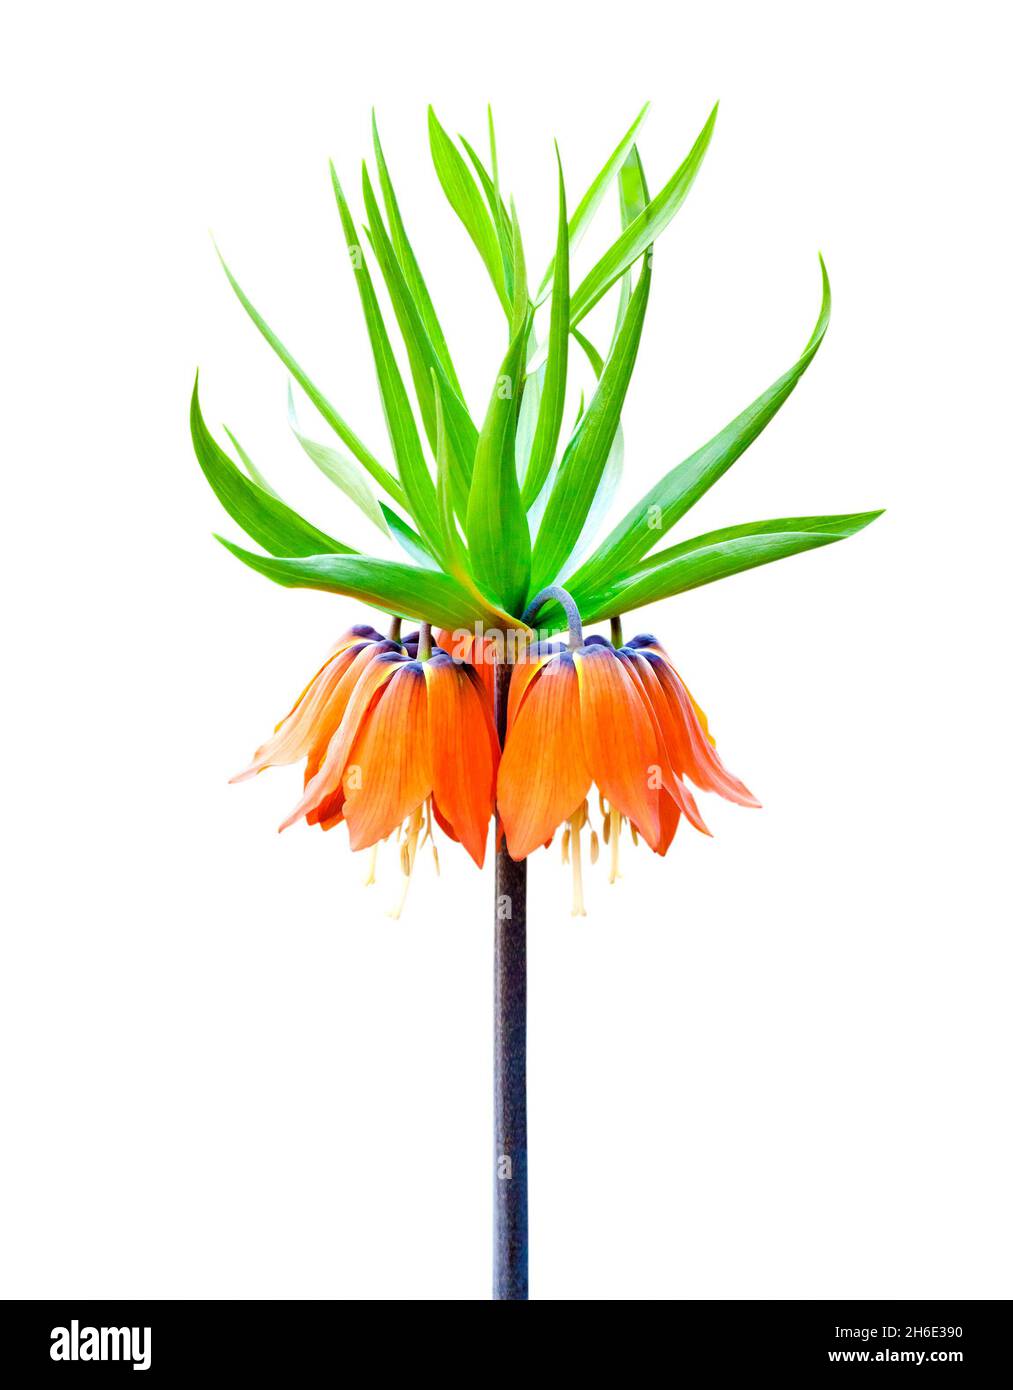 Kaiser's crown (Fritillaria imperialis) flower closeup isolated on white background with clipping path Stock Photo